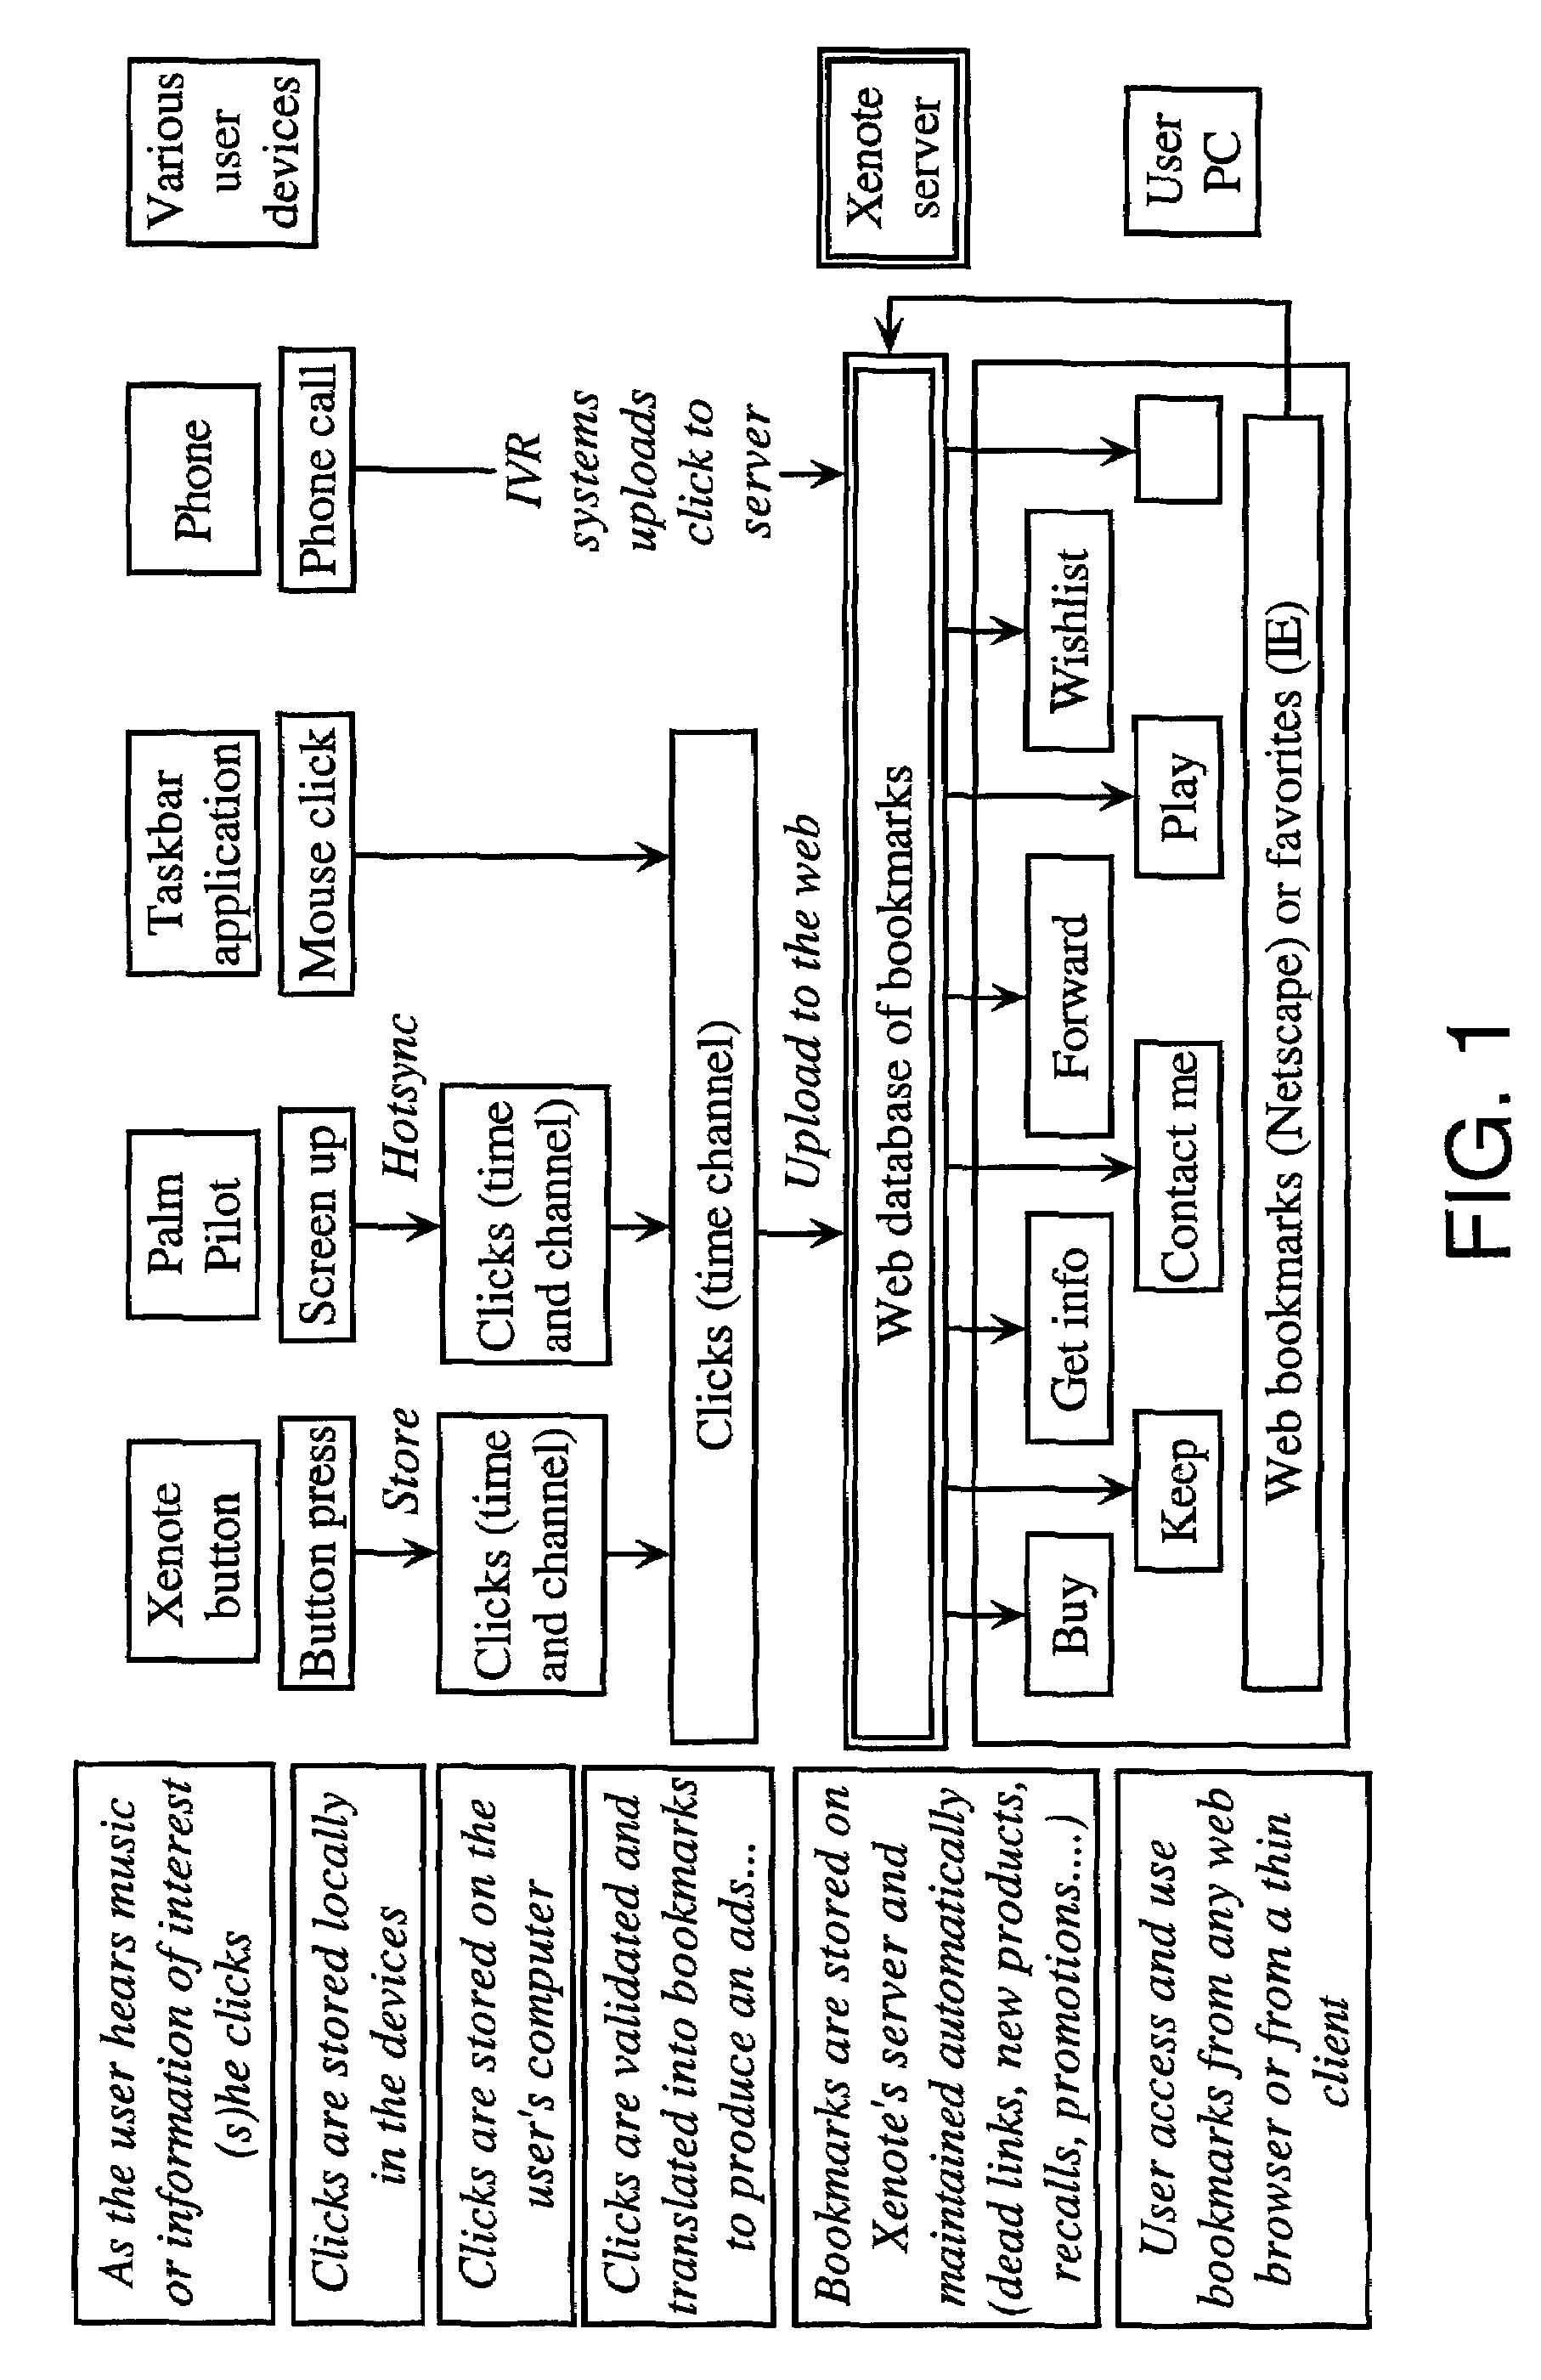 Method and apparatus for detecting a radio frequency to which a broadcast receiver is tuned